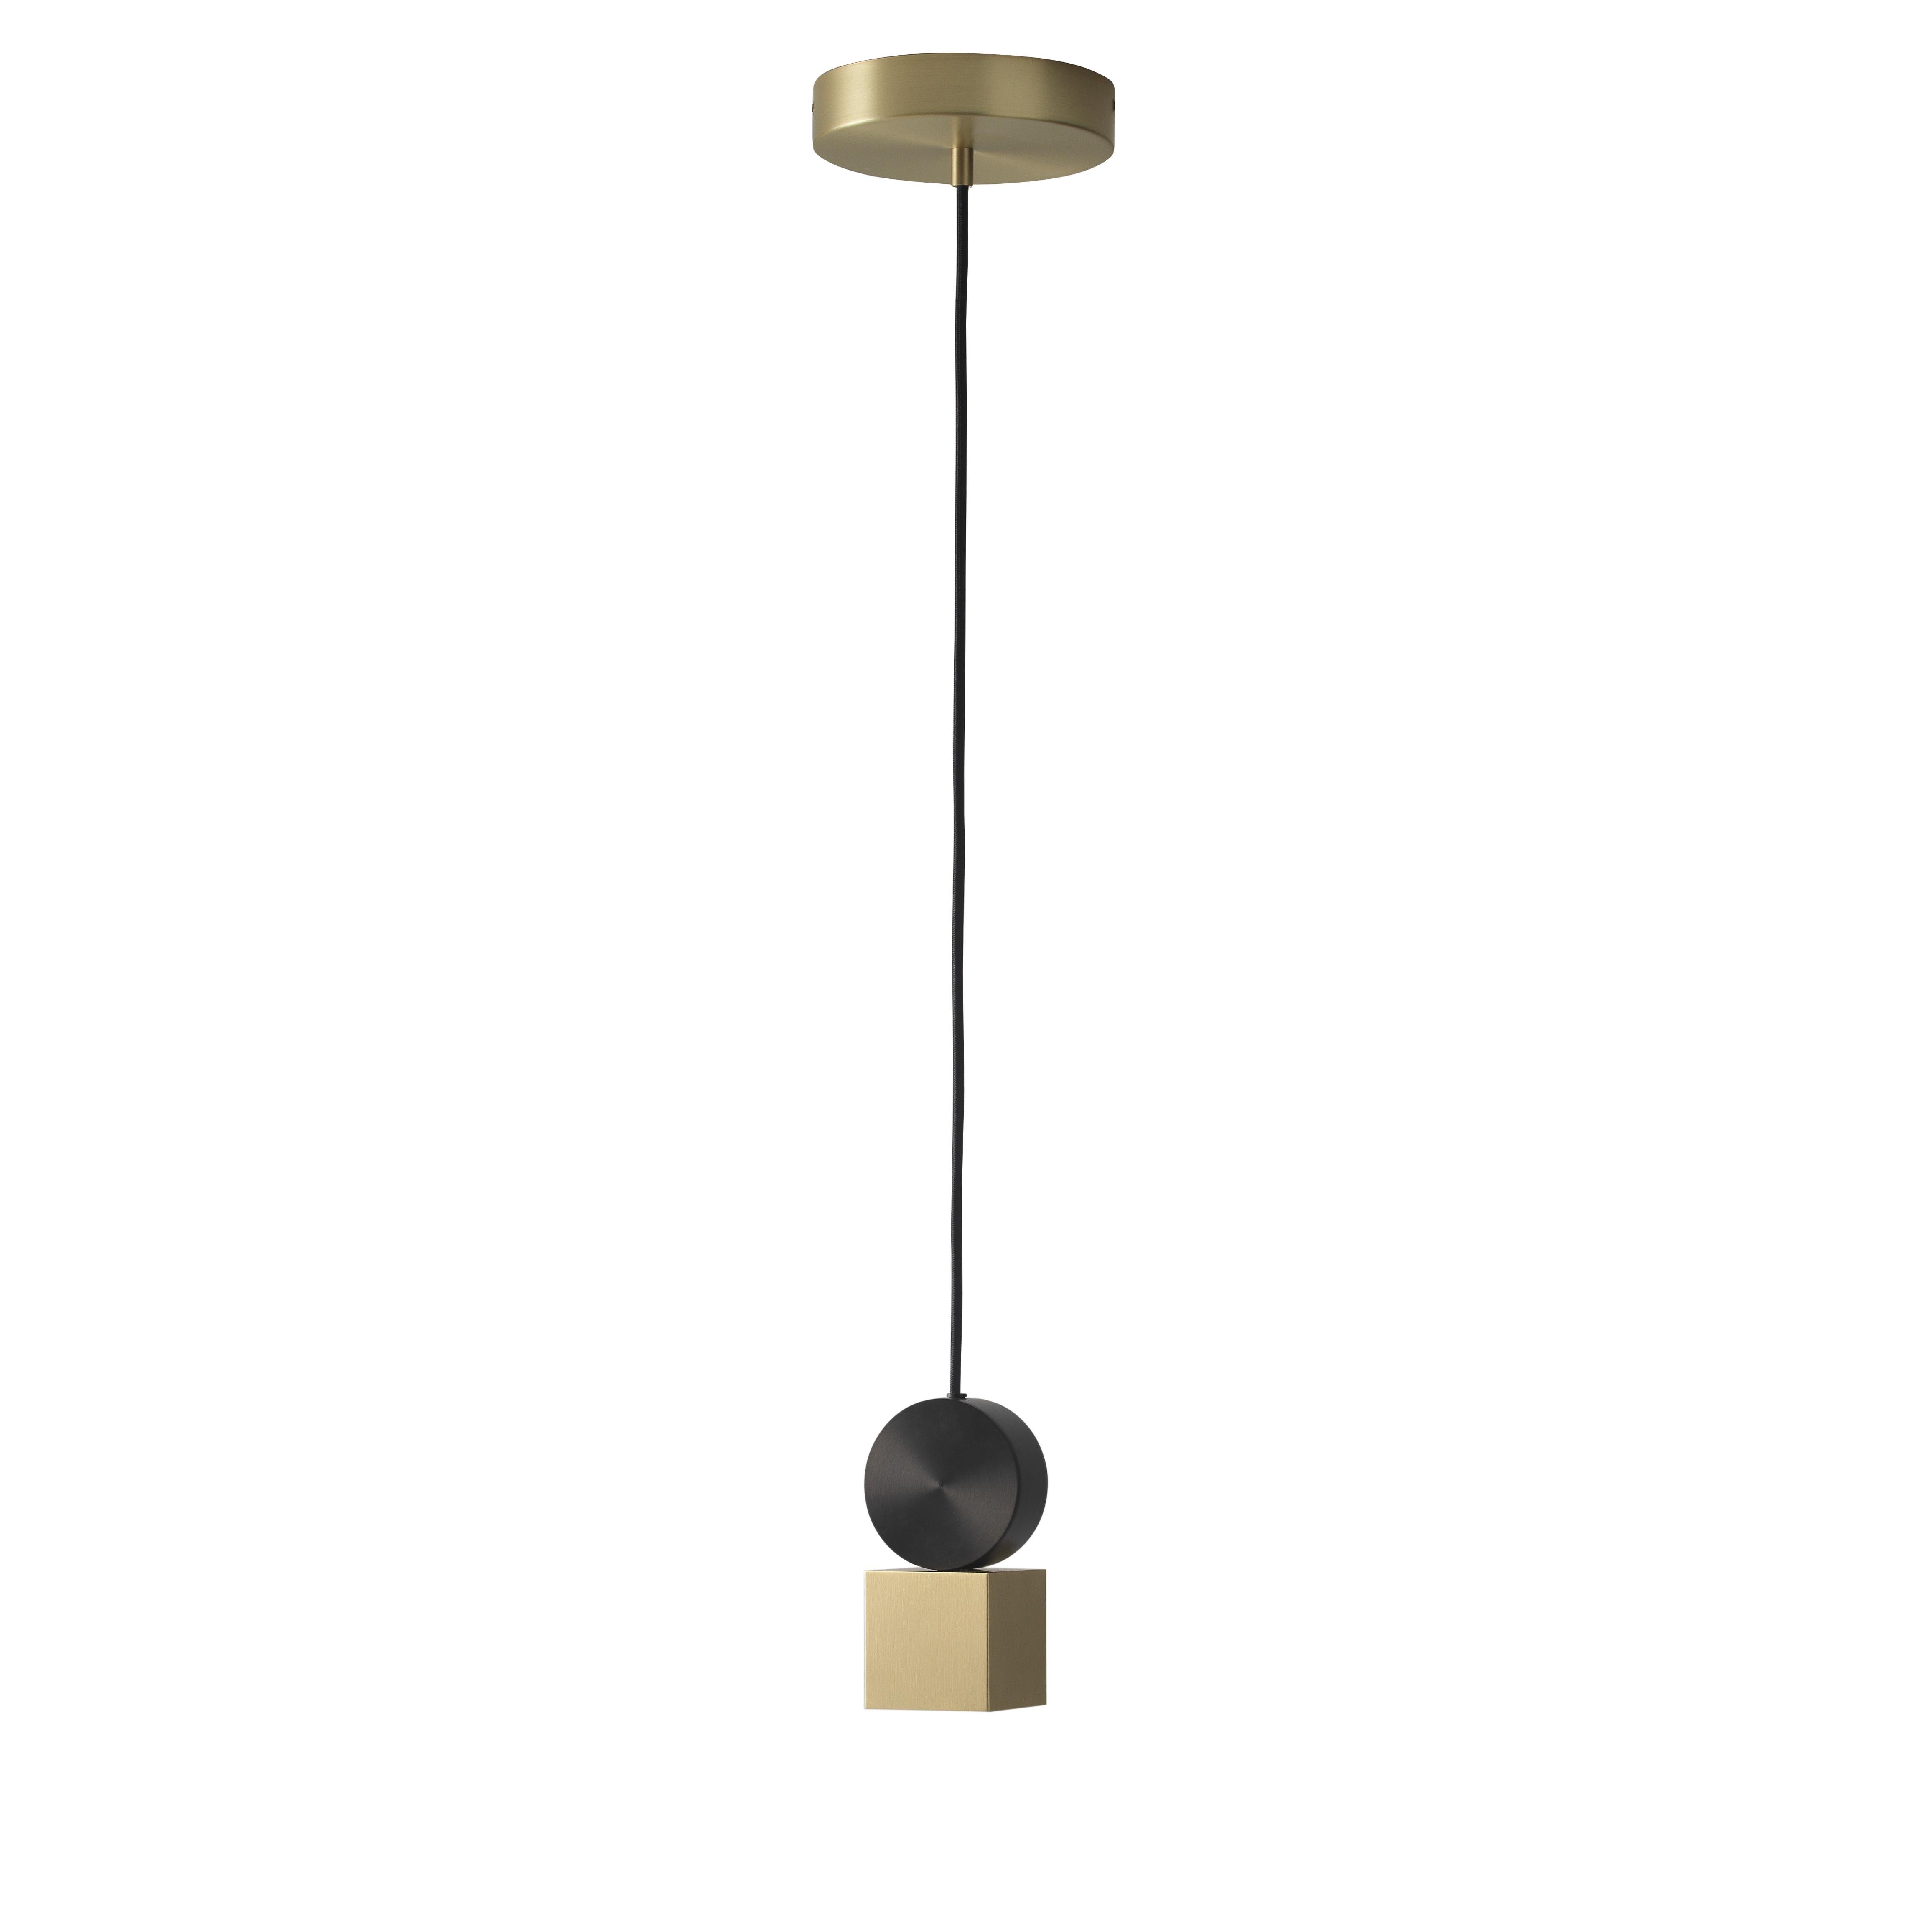 Calee V1 pendant by Pool
Dimensions: D16 X H221.3 cm
Materials: solid brass, polycarbonate, black textile cable (2m).
Others finishes and dimensions are available.

All our lamps can be wired according to each country. If sold to the USA it